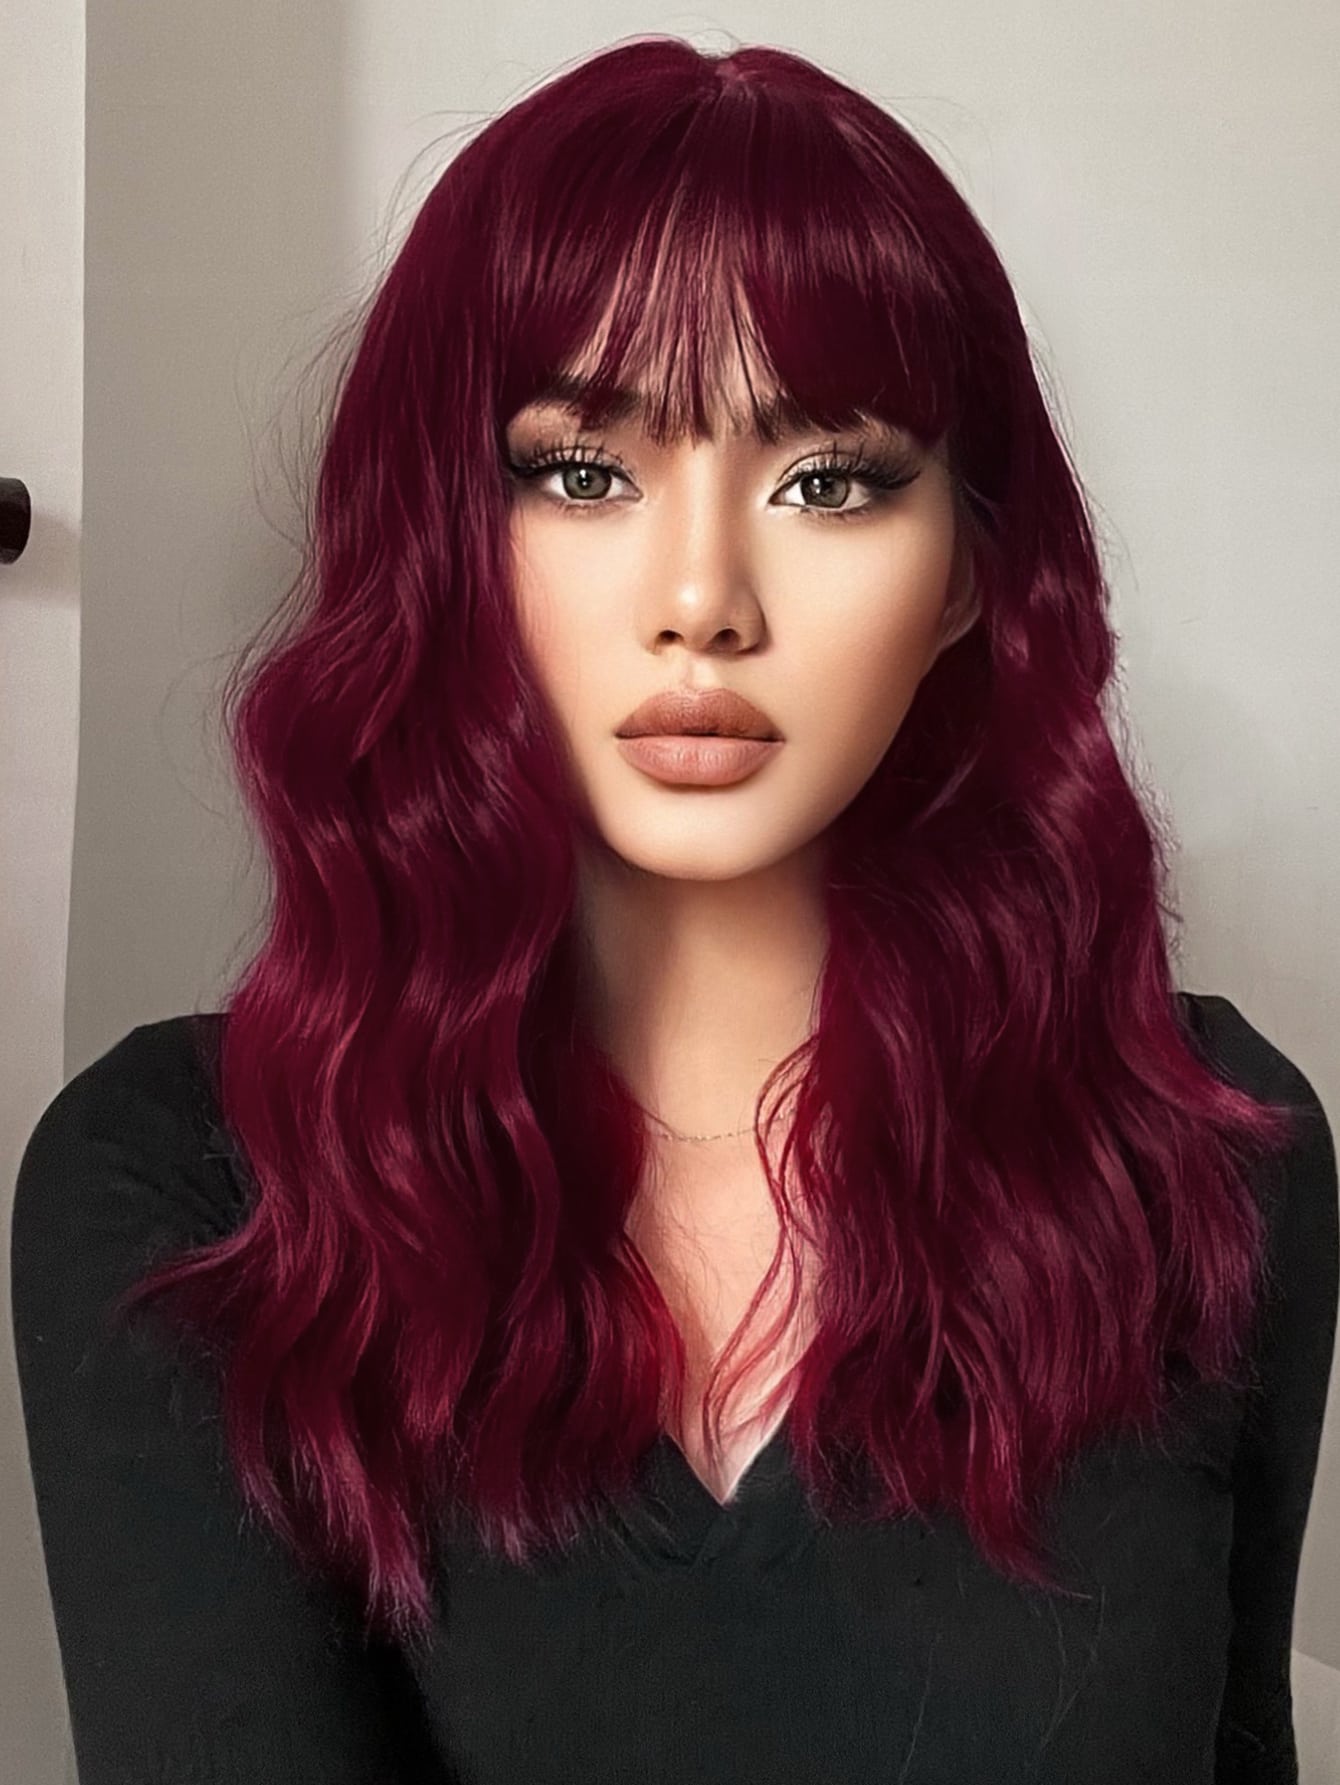 Medium Curly Synthetic Wig With Bangs